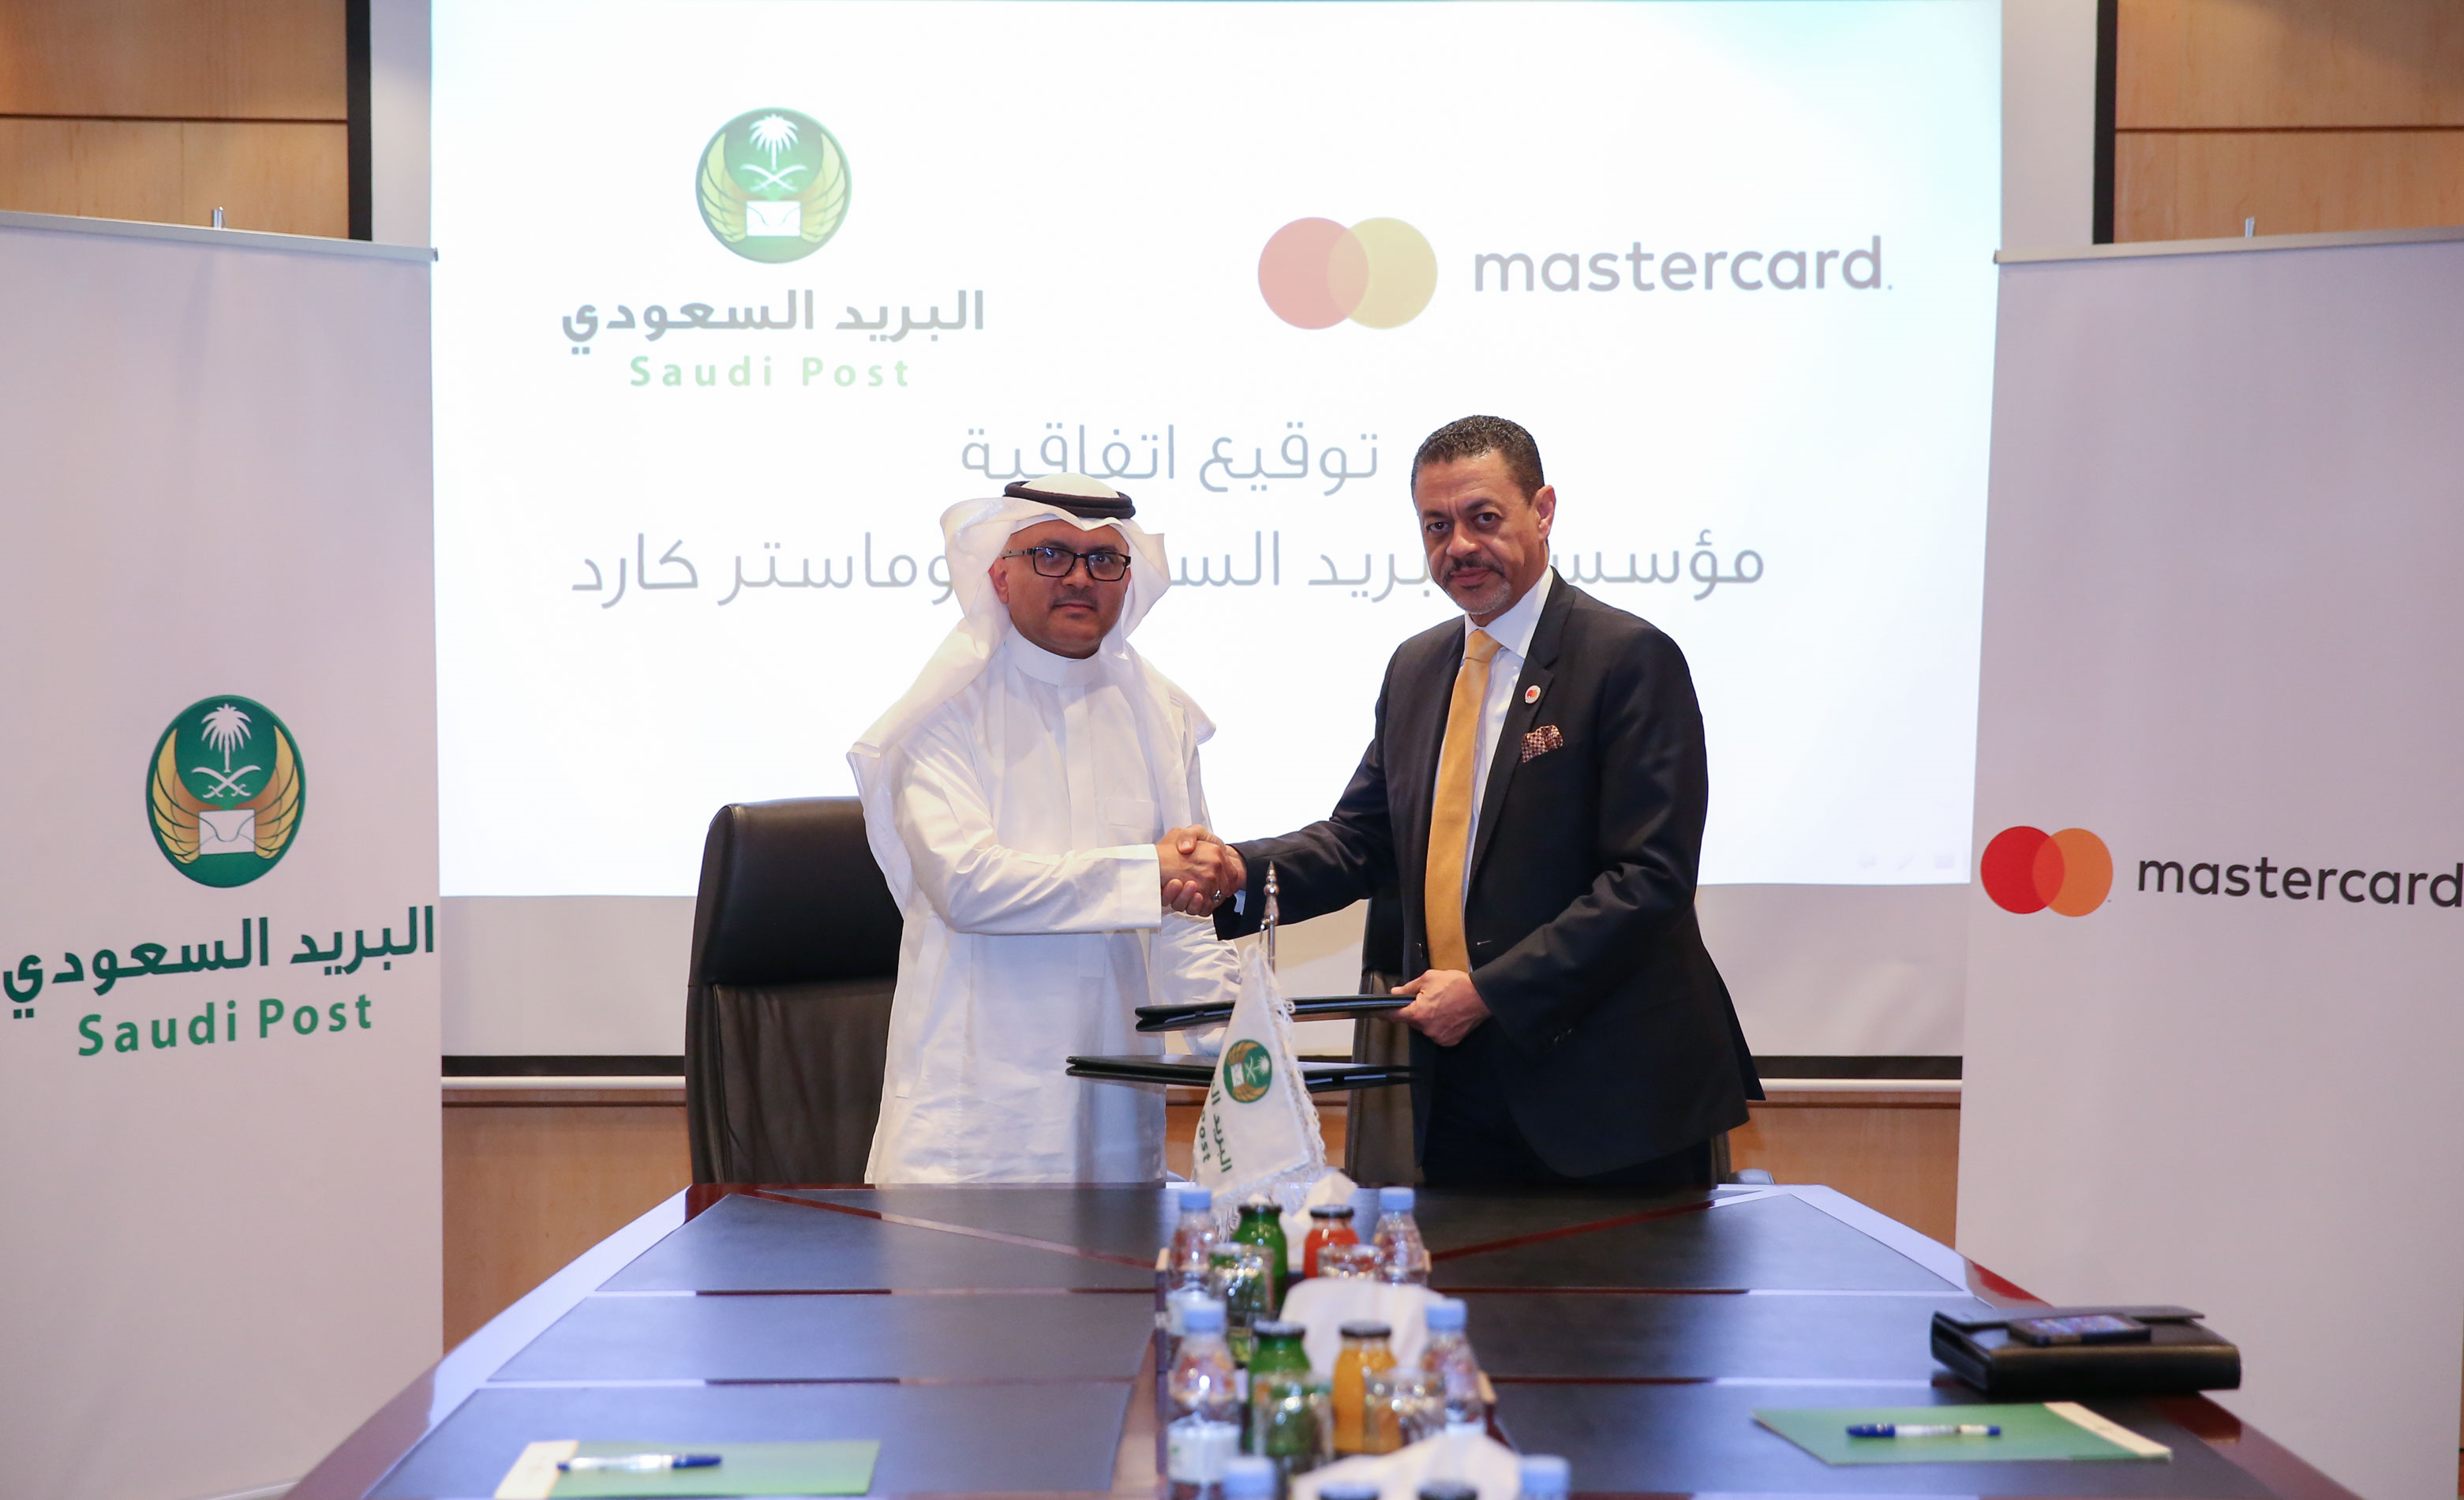 Saudi Post and Mastercard join hands to enable in-store and online card acceptance and improve customer experience